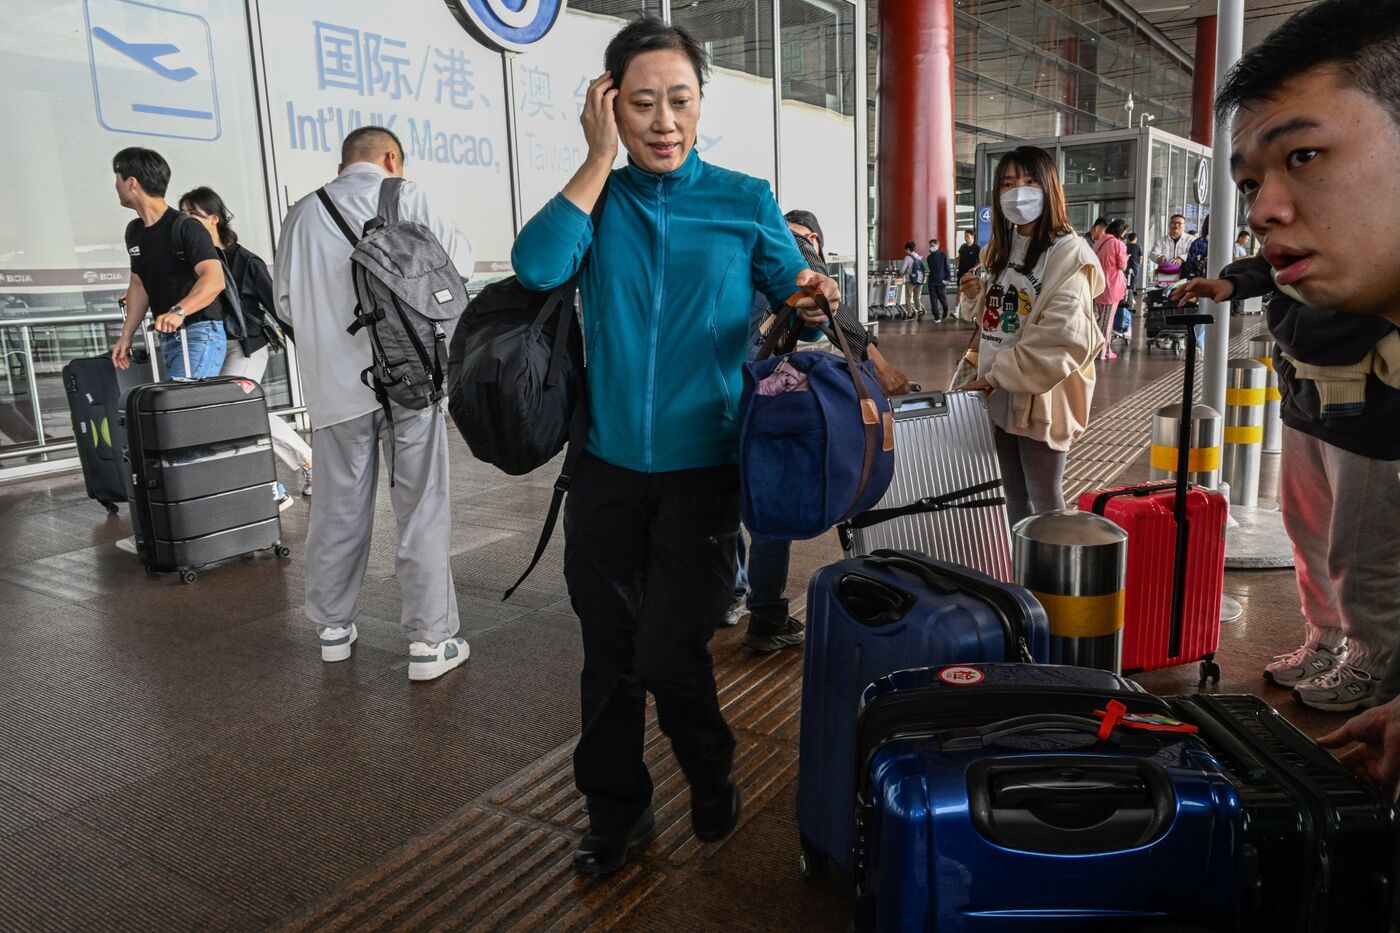 china air travel recovery